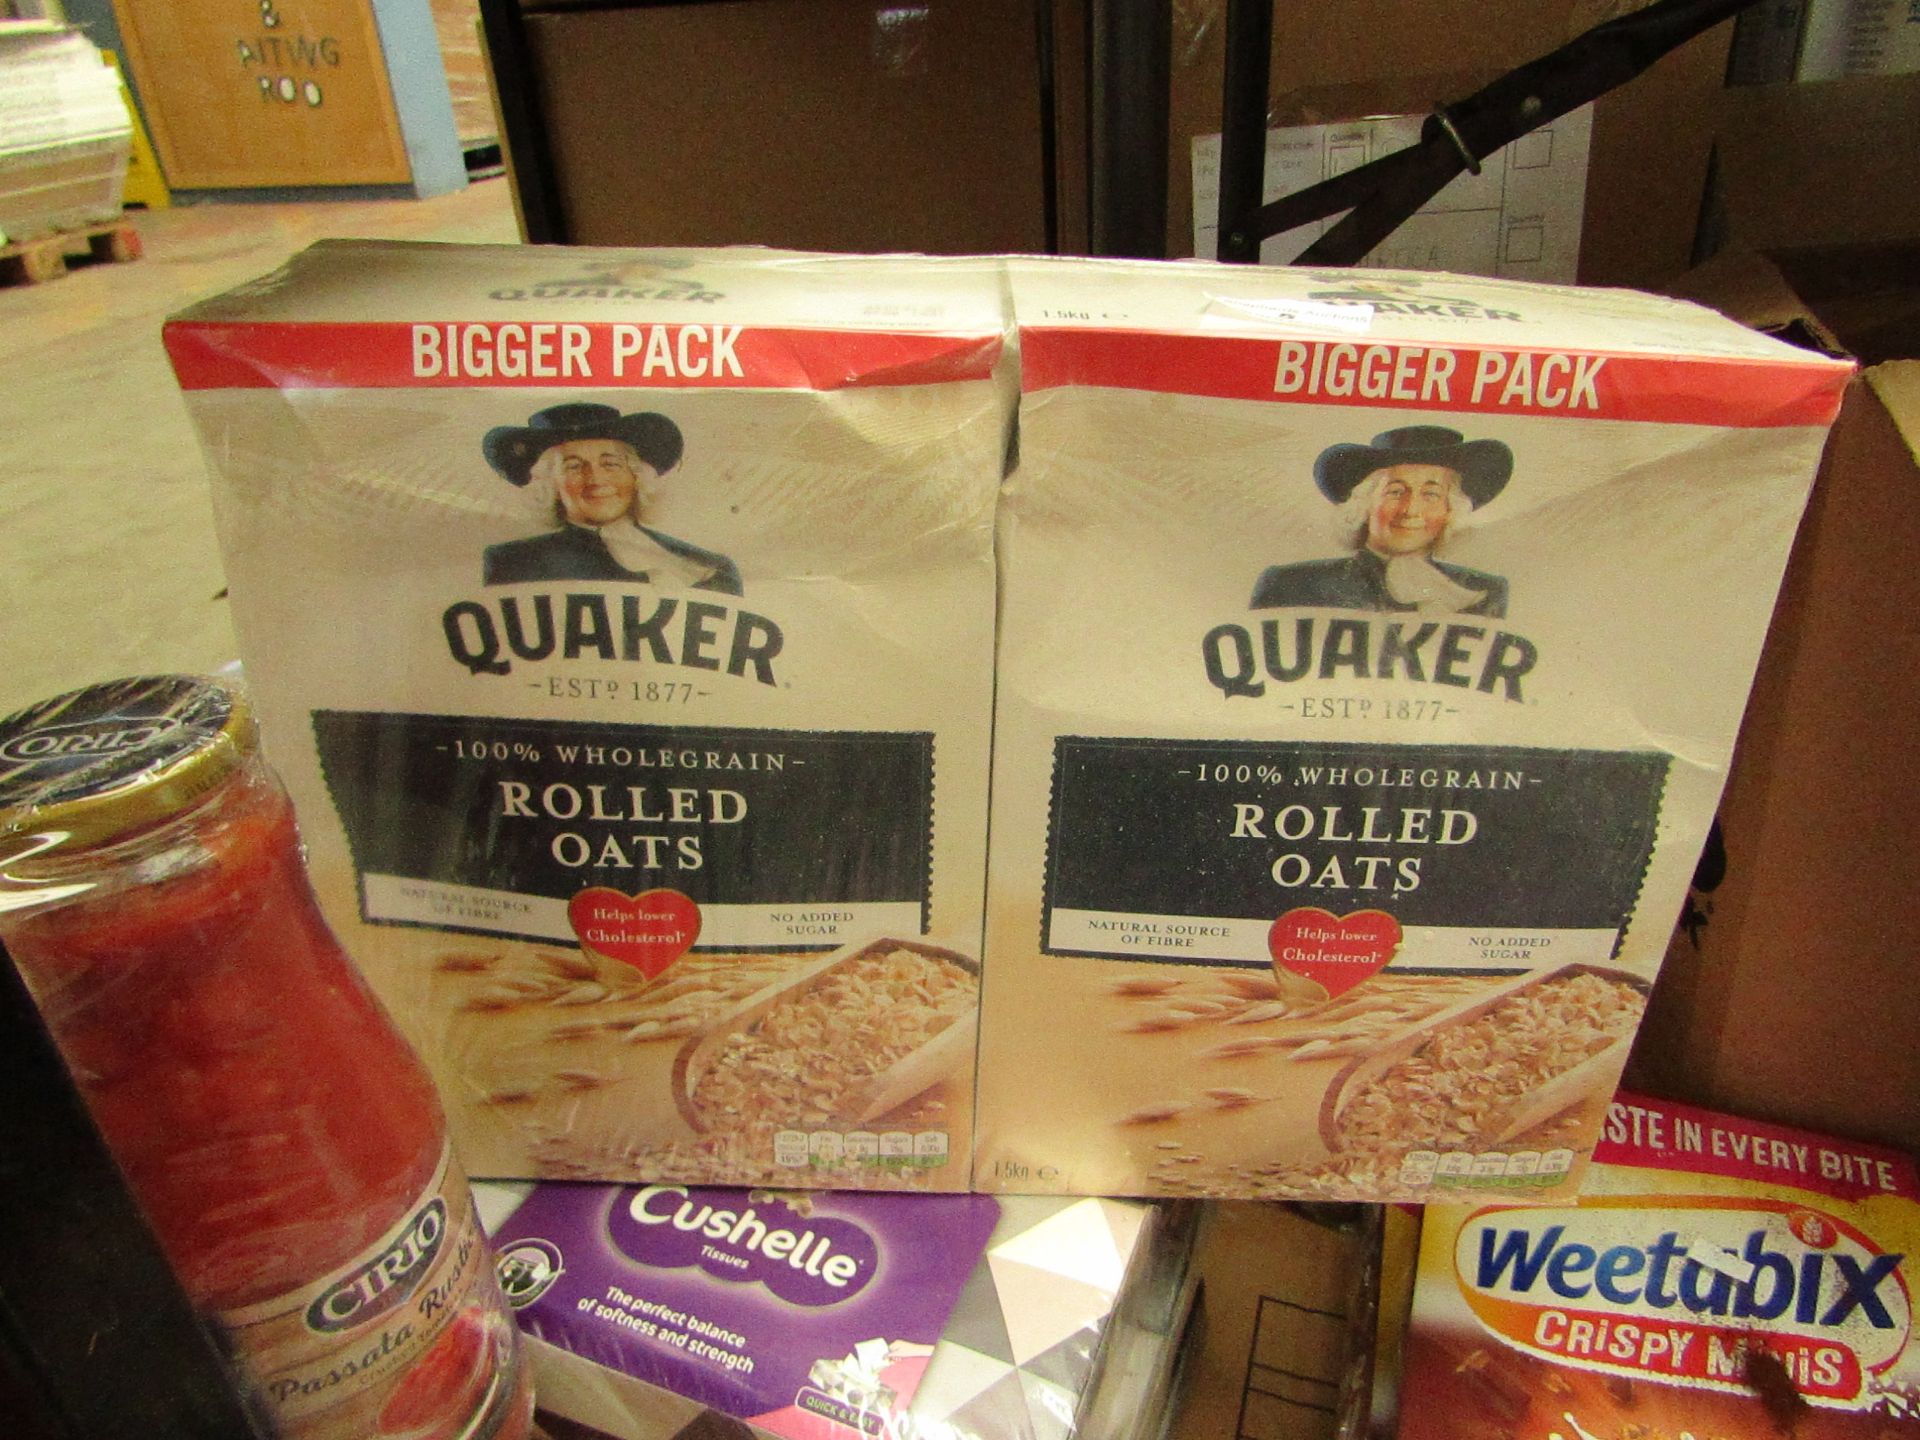 2x Quaker - Rolled Oats 1.5kg - BB - 03/07/21 - Boxed & Packaged.